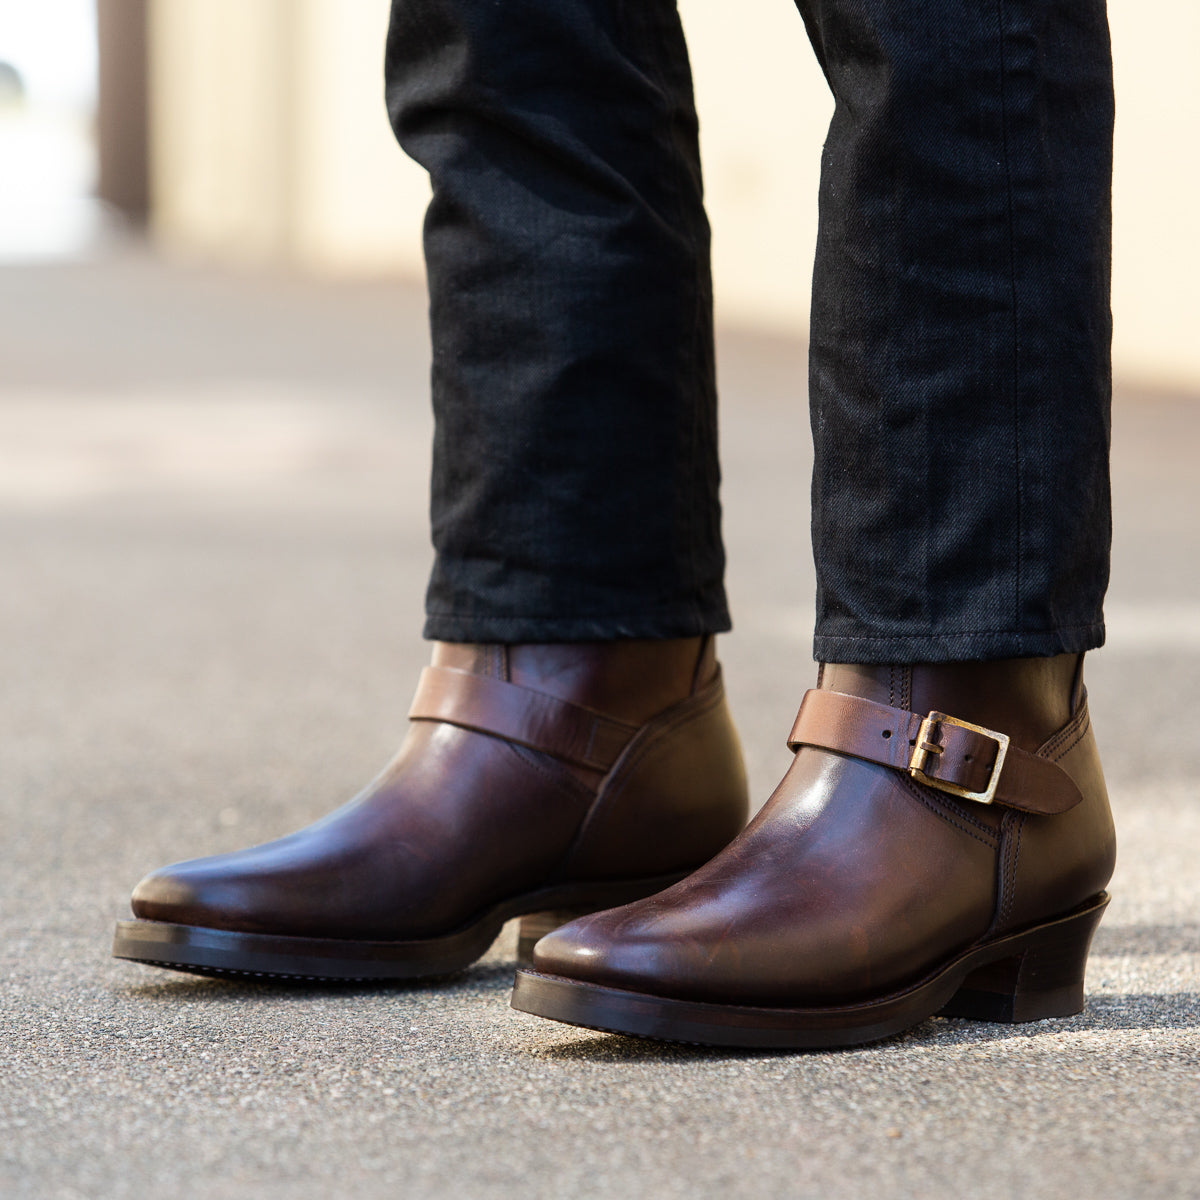 Clinch Boots Engineer Boots - Brown Overdyed Horsebutt - CN Wide Last ...